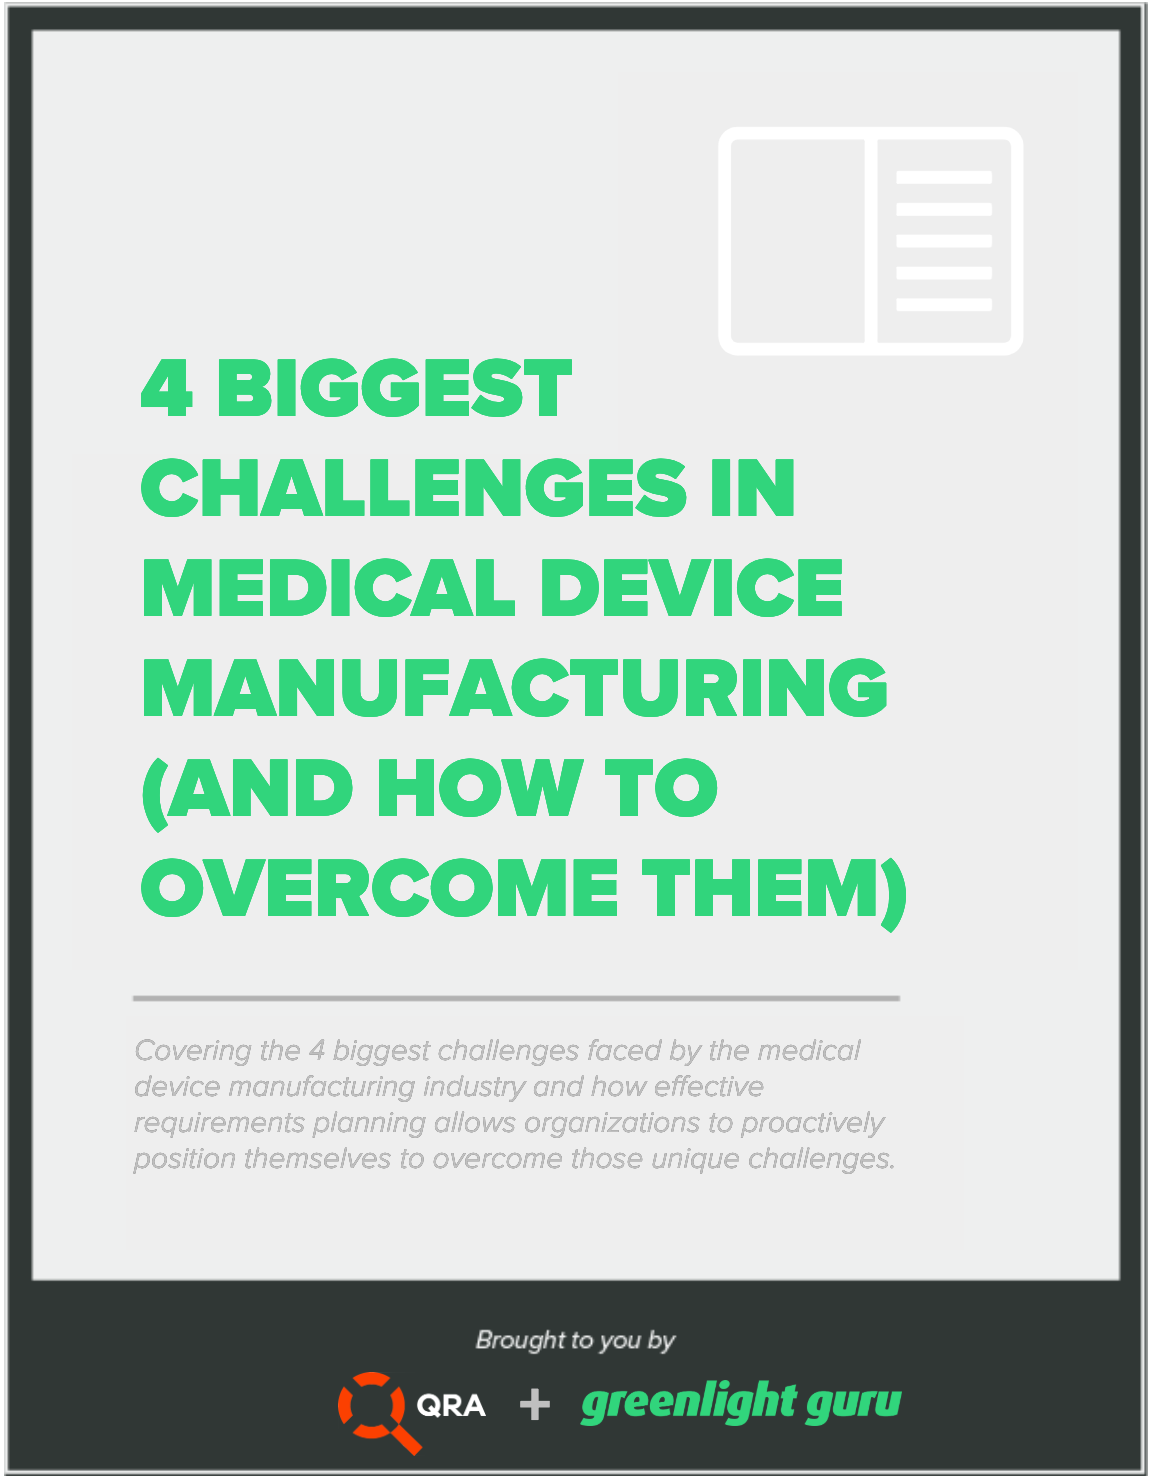 4 Biggest Challenges in Medical Device Manufacturing (and how to overcome them)